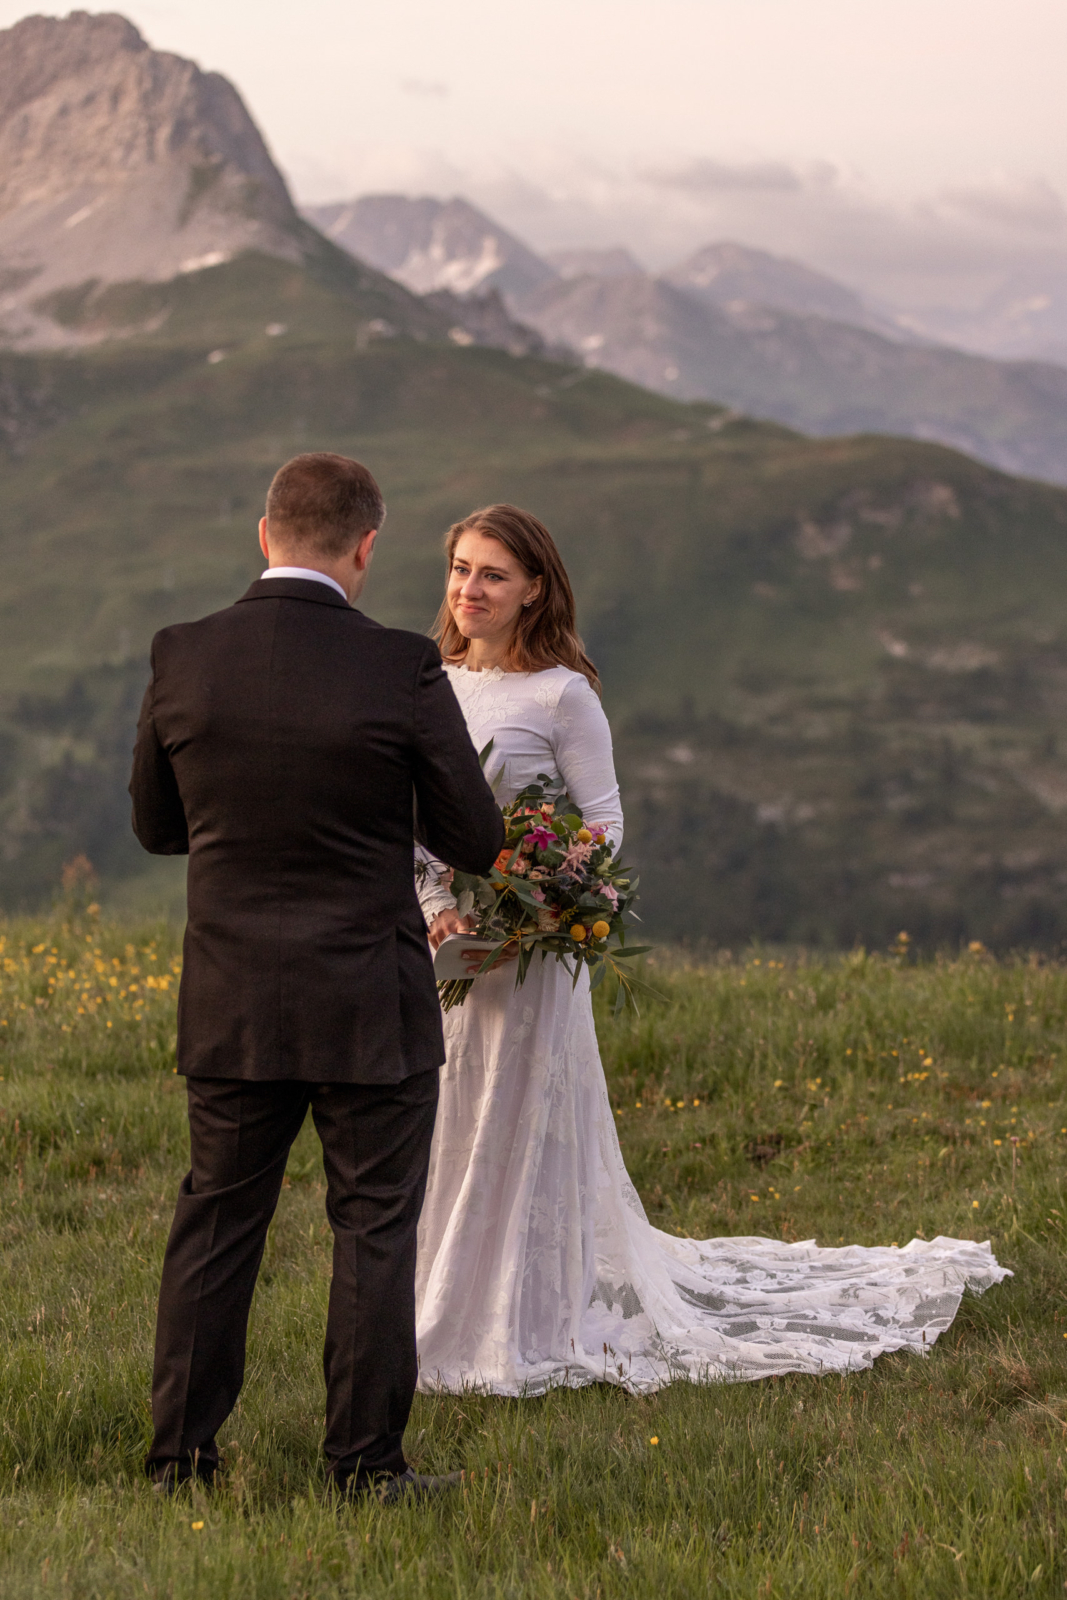 personal vows at sunrise in the Austrian Mountains